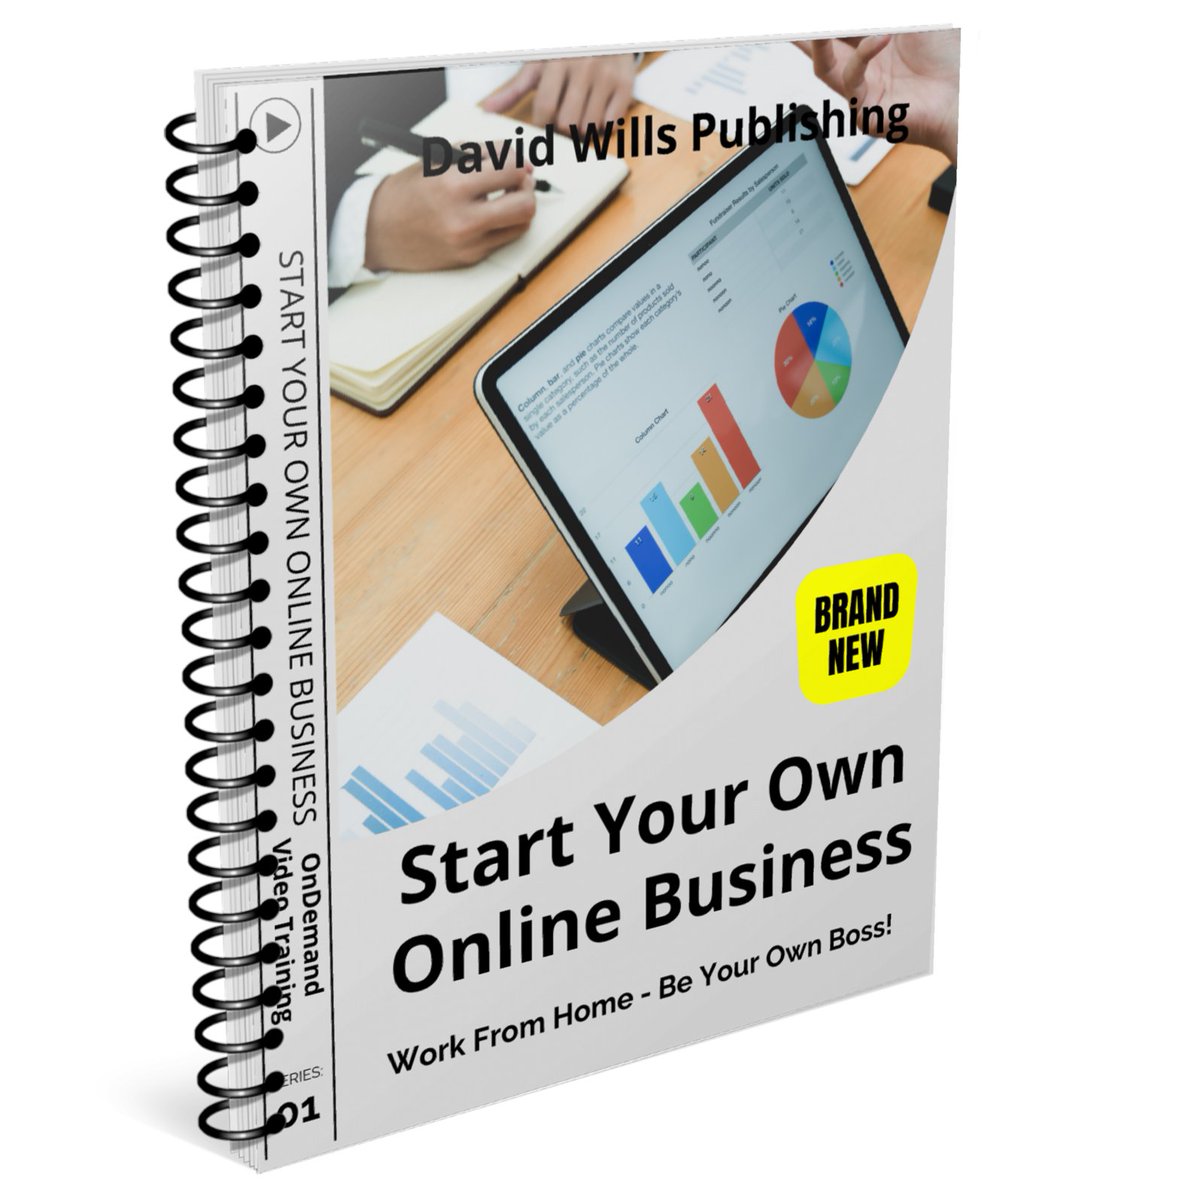 For courses on how to set up your online business, how to outsource your business tasks and how to build your sales funnels, visit davidwills.podia.com #salesfunnels #outsourcing #WorkFromHome